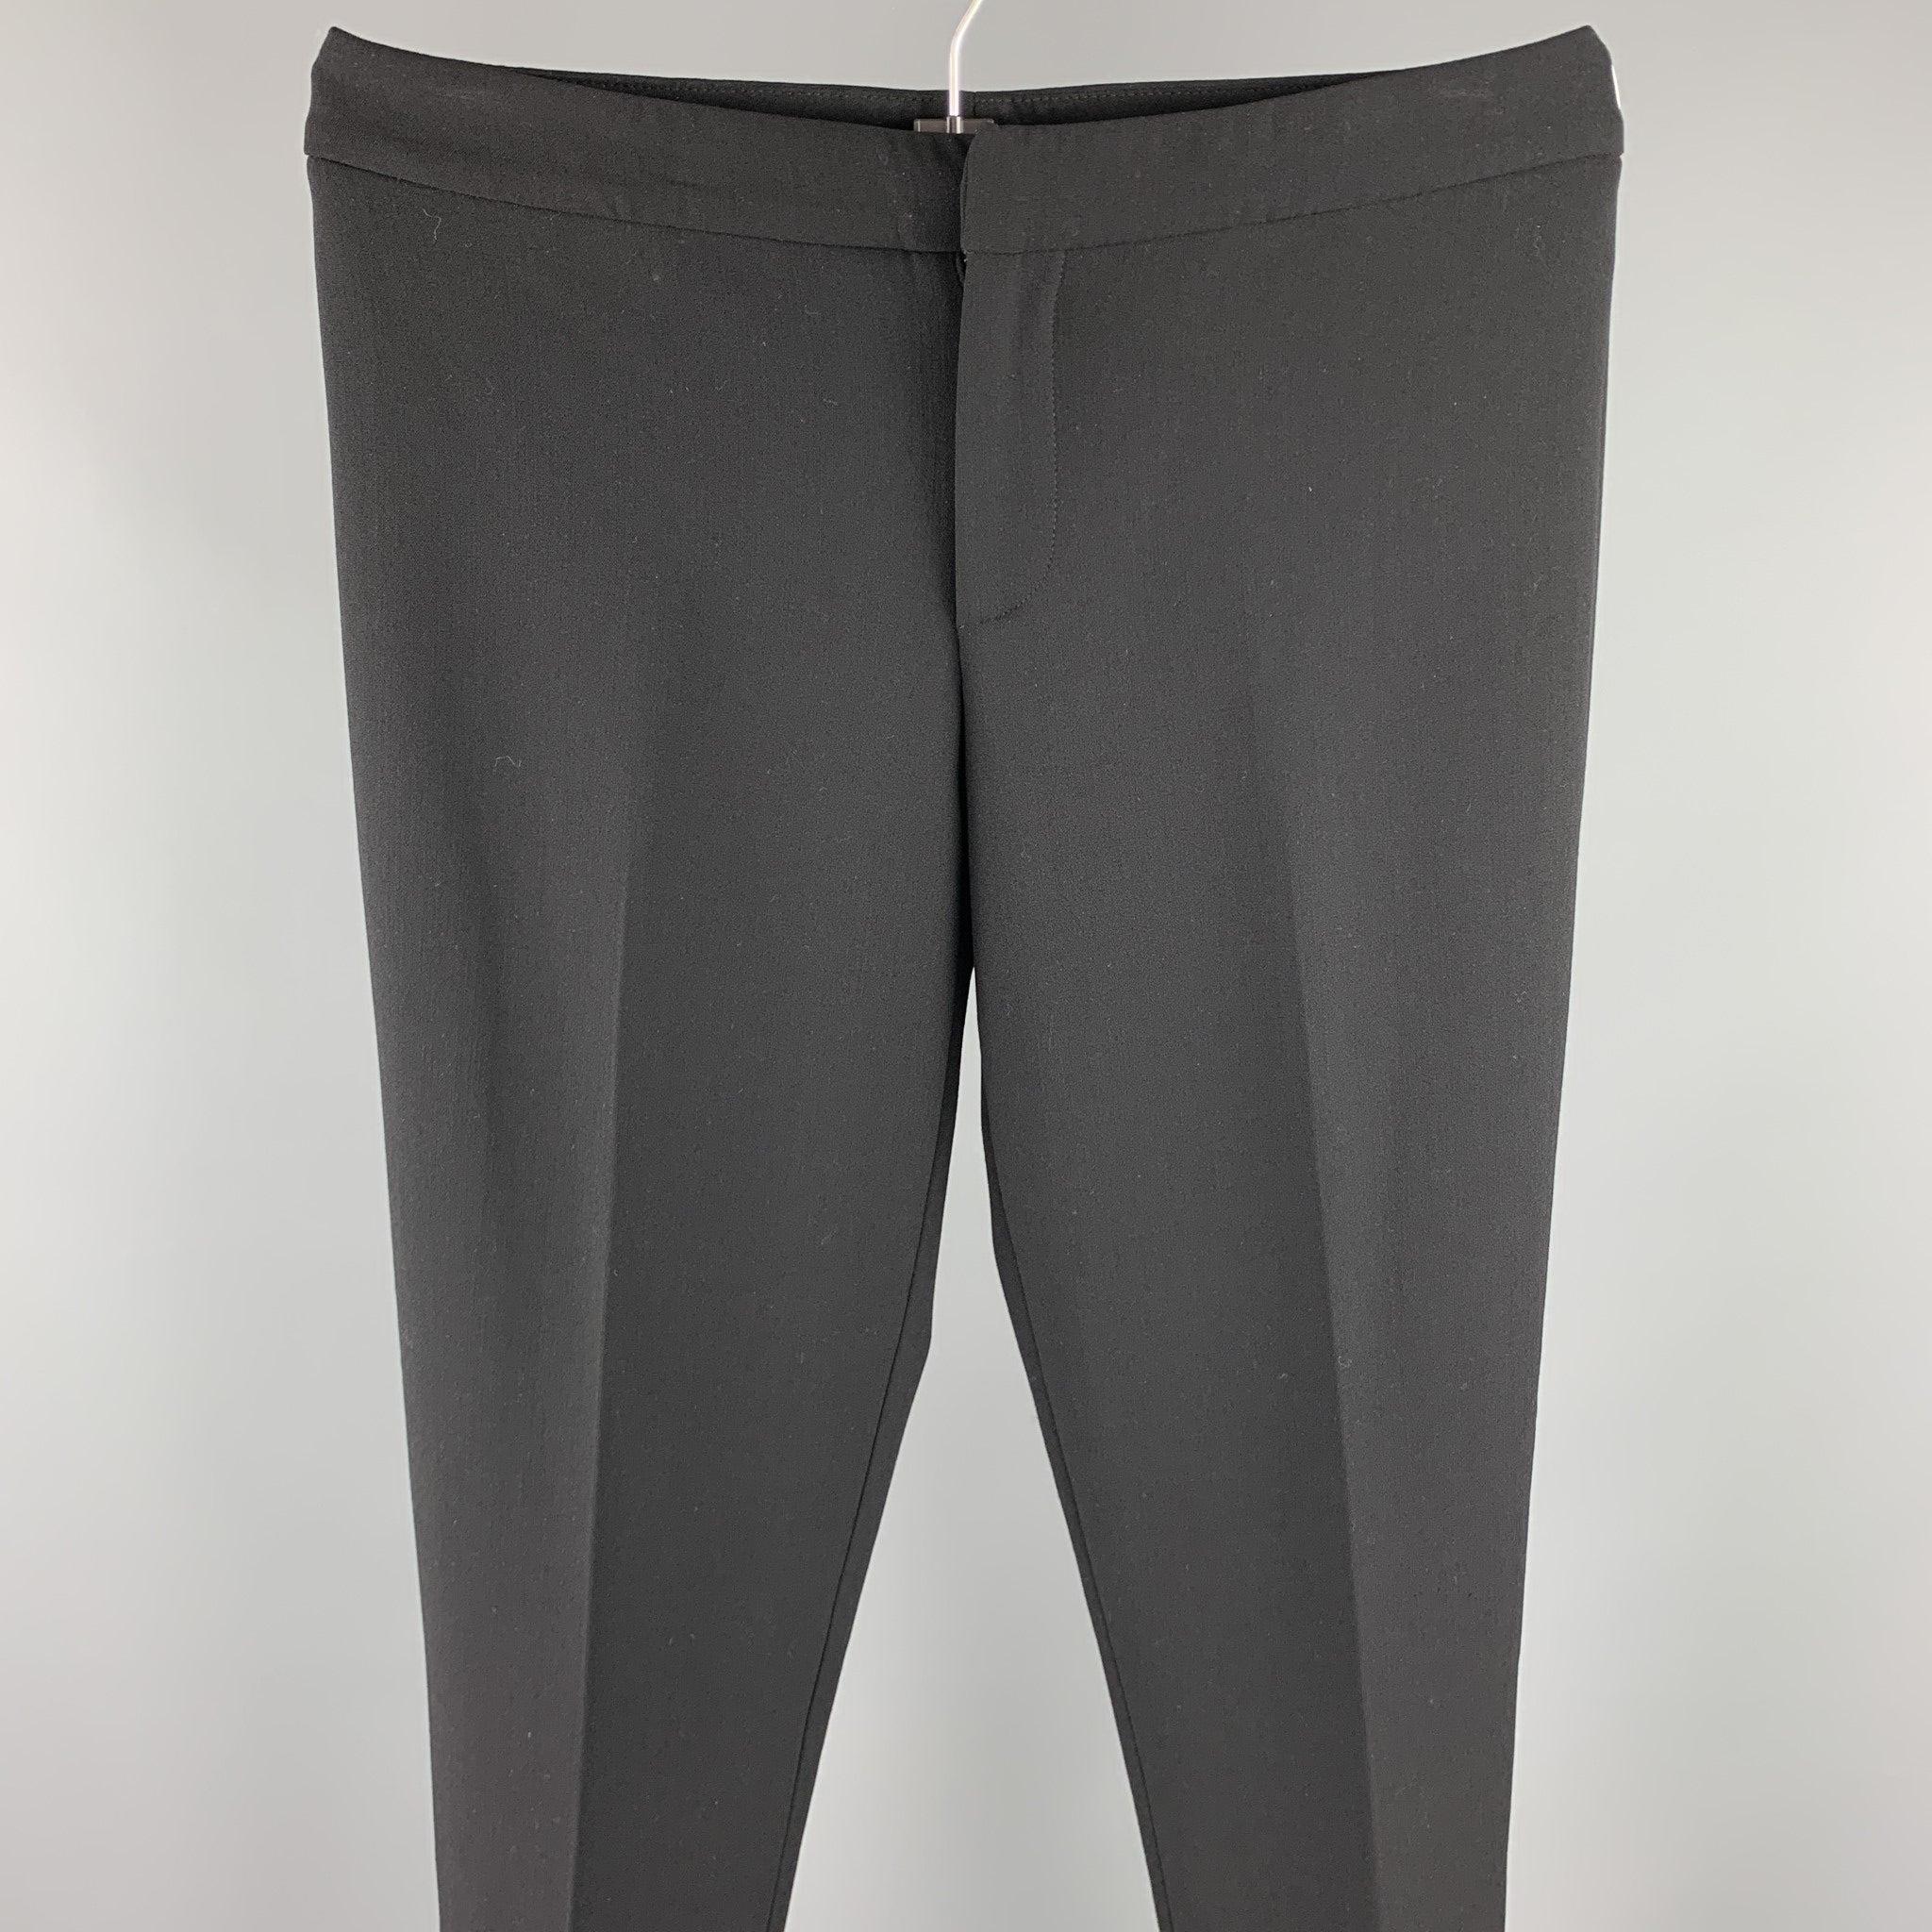 RALPH LAUREN COLLECTION dress pants comes in a black fabric featuring a straight leg, front tab, and a zip fly closure.Excellent
Pre-Owned Condition. 

Marked:   6 

Measurements: 
  Waist: 32 inches 
Rise: 8.5 inches 
Inseam: 31 inches 
  
  
